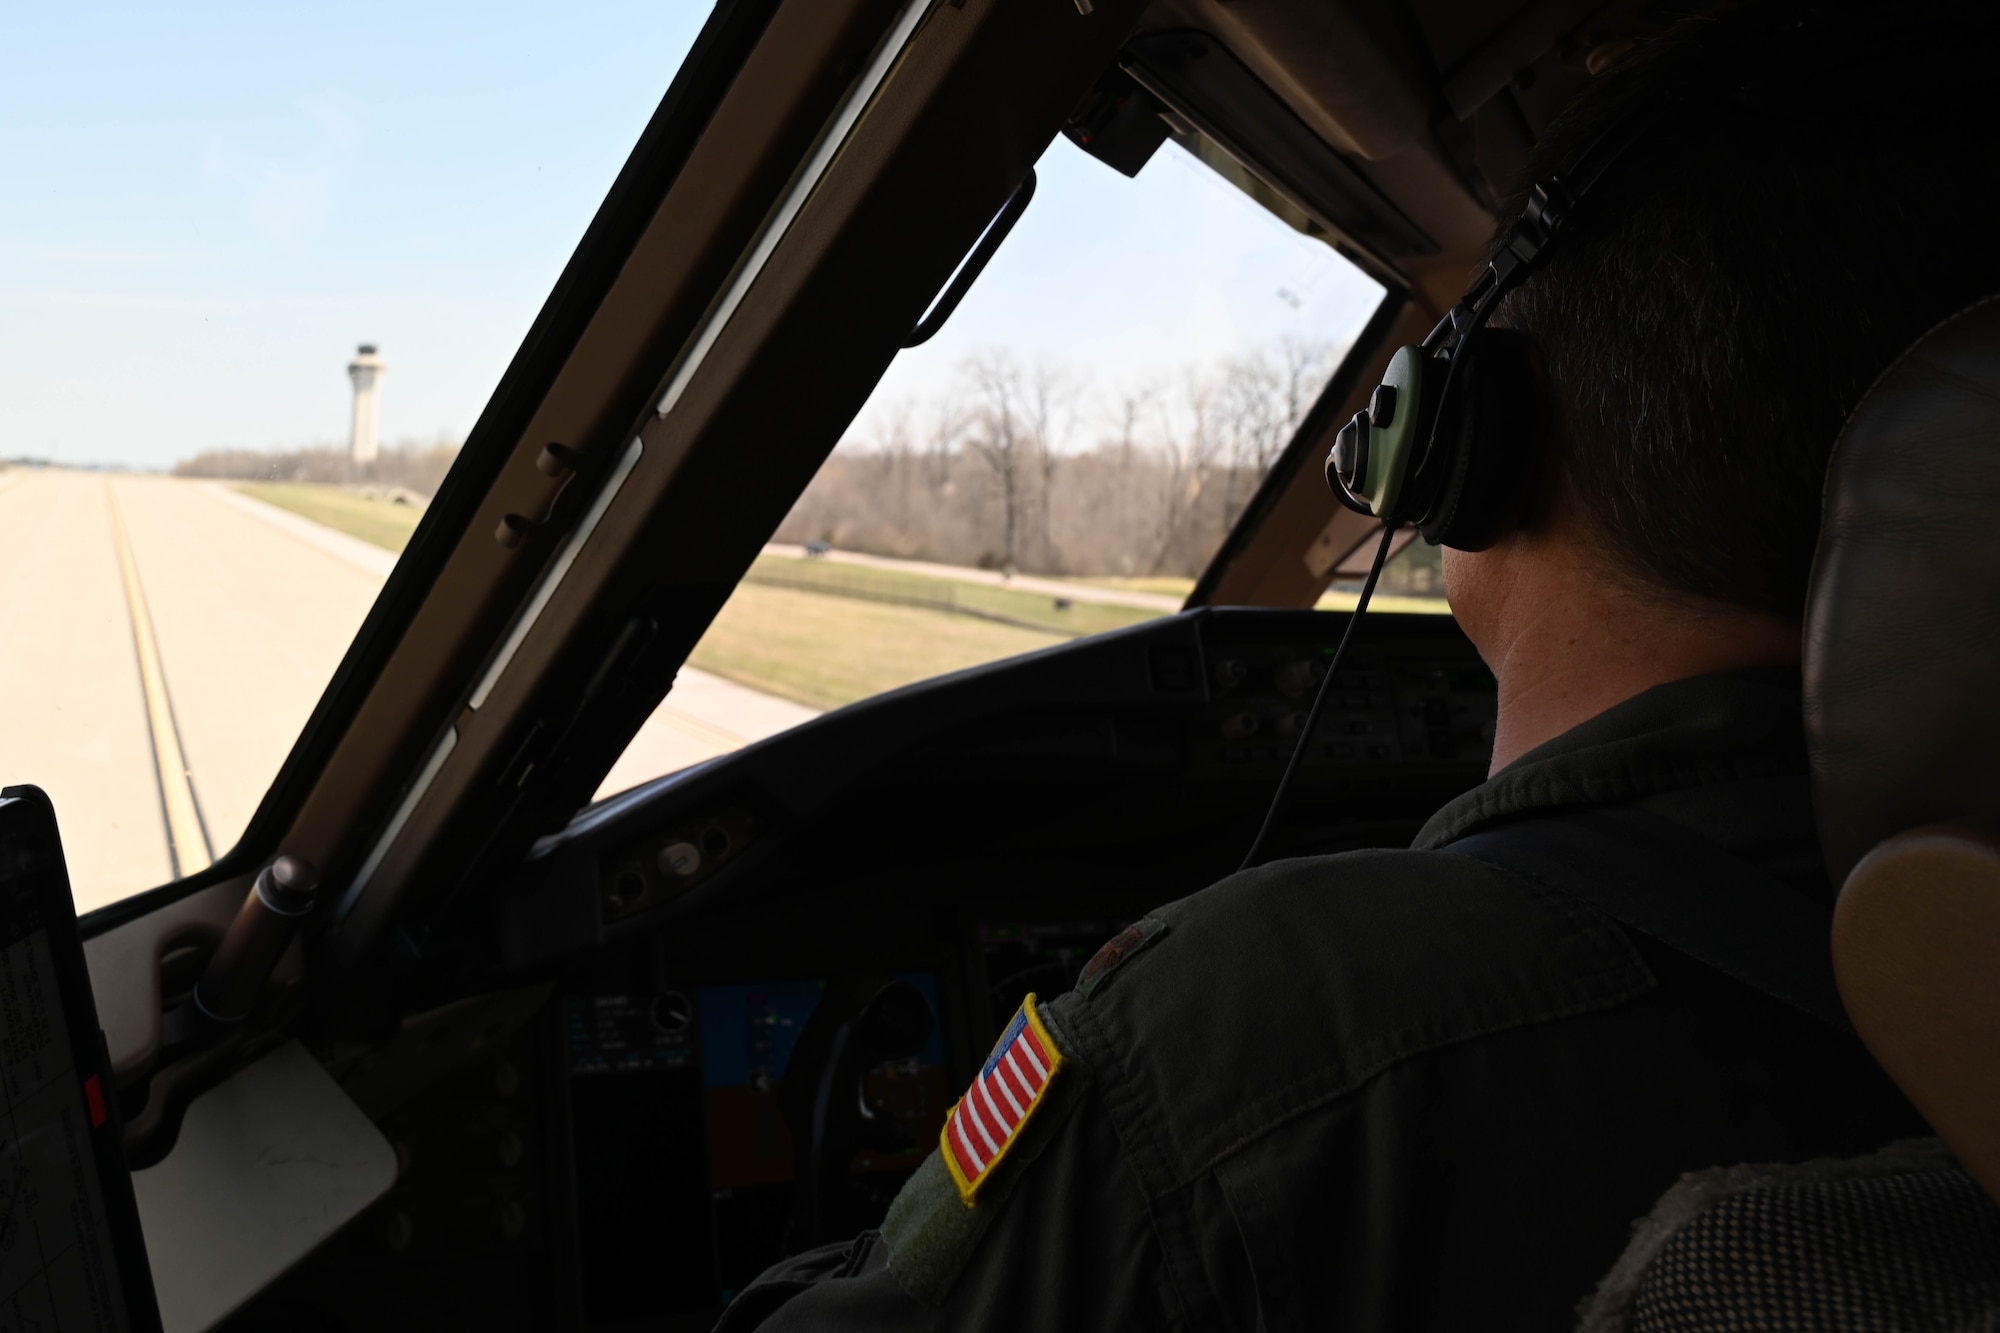 U.S. Air Force Maj. Matthew Slaughter, 730th Air Mobility Training Squadron (AMTS) instructor pilot, taxis a KC-46 Pegasus during Combat Cardinal 2024 at Scott Air Force Base, Illinois, March 13, 2024. An aircrew from the 56th Air Refueling Squadron supported Airmen from the 375th Air Mobility Wing during their readiness exercise called “Combat Cardinal.” Airmen from the 56th Air Refueling Squadron, along with Airmen from the 730th AMTS, were able to provide support for the exercise, which tested critical readiness skills for the entire 375th AMW. (U.S. Air Force photo by Senior Airman Trenton Jancze)